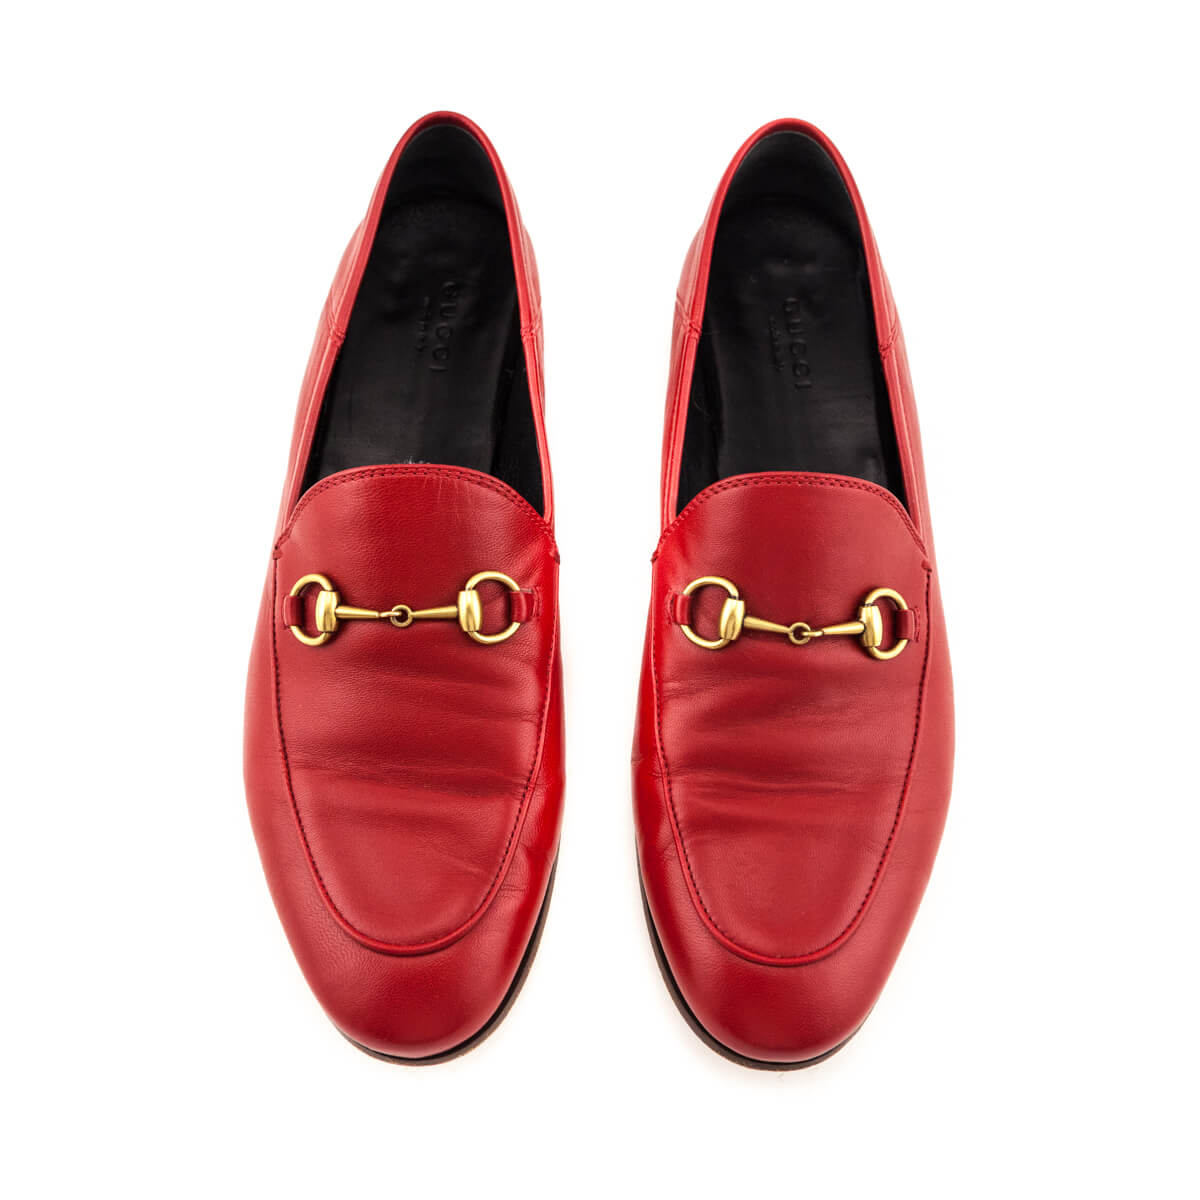 Gucci Red Leather Brixton Horsebit Loafers Size US 9 | IT 39 - Love that Bag etc - Preowned Authentic Designer Handbags & Preloved Fashions